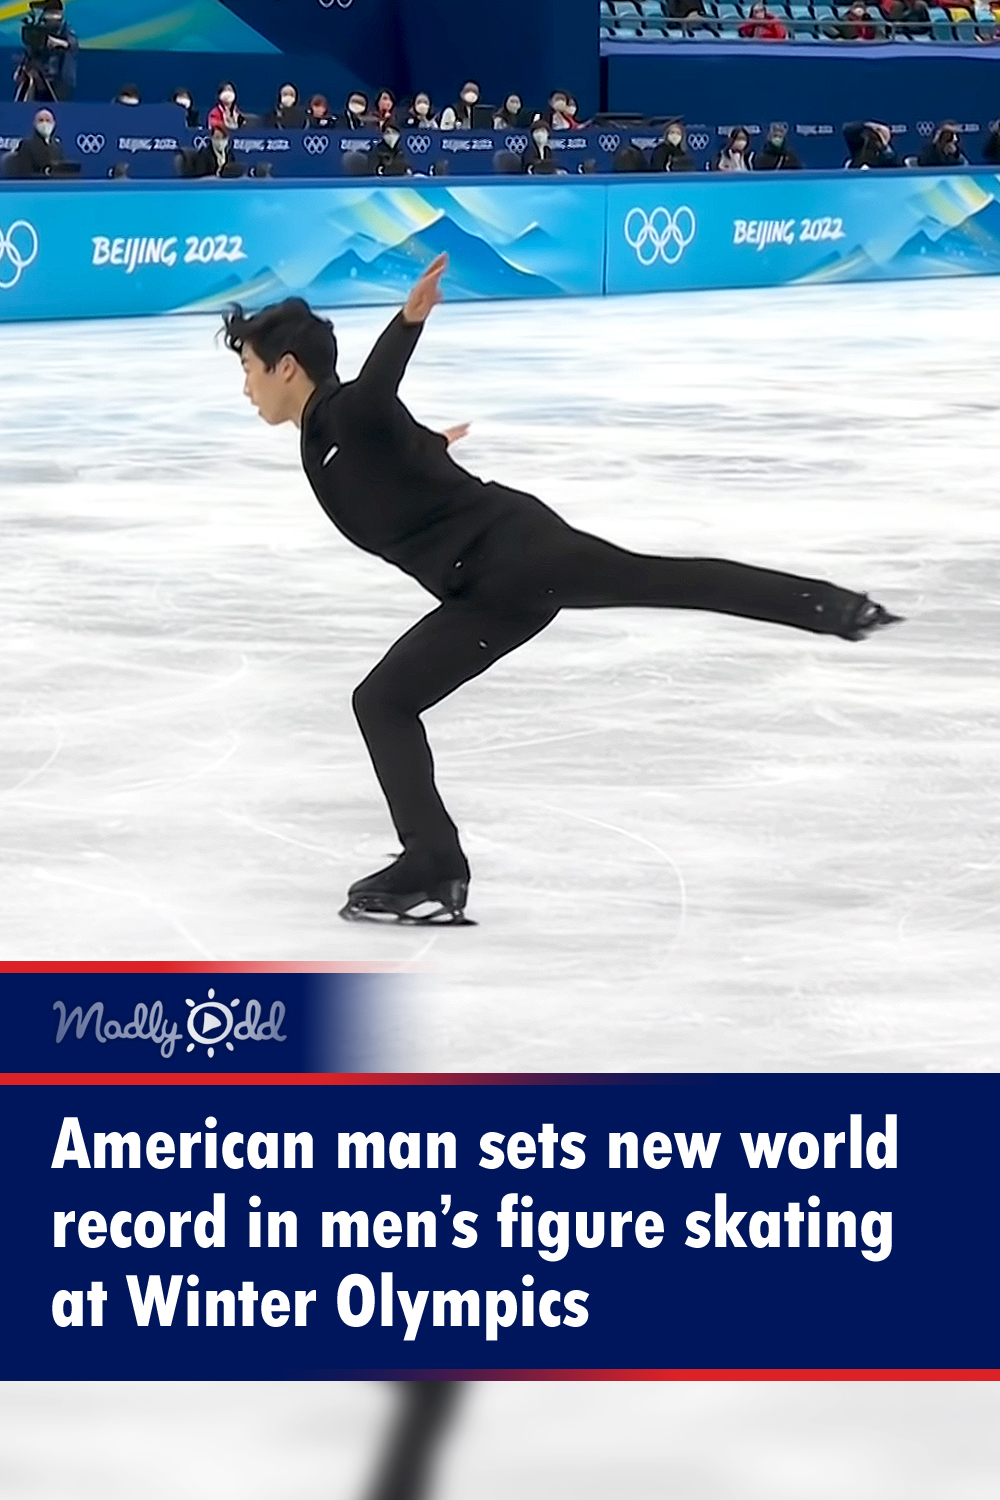 American man sets new world record in men’s figure skating at Winter Olympics